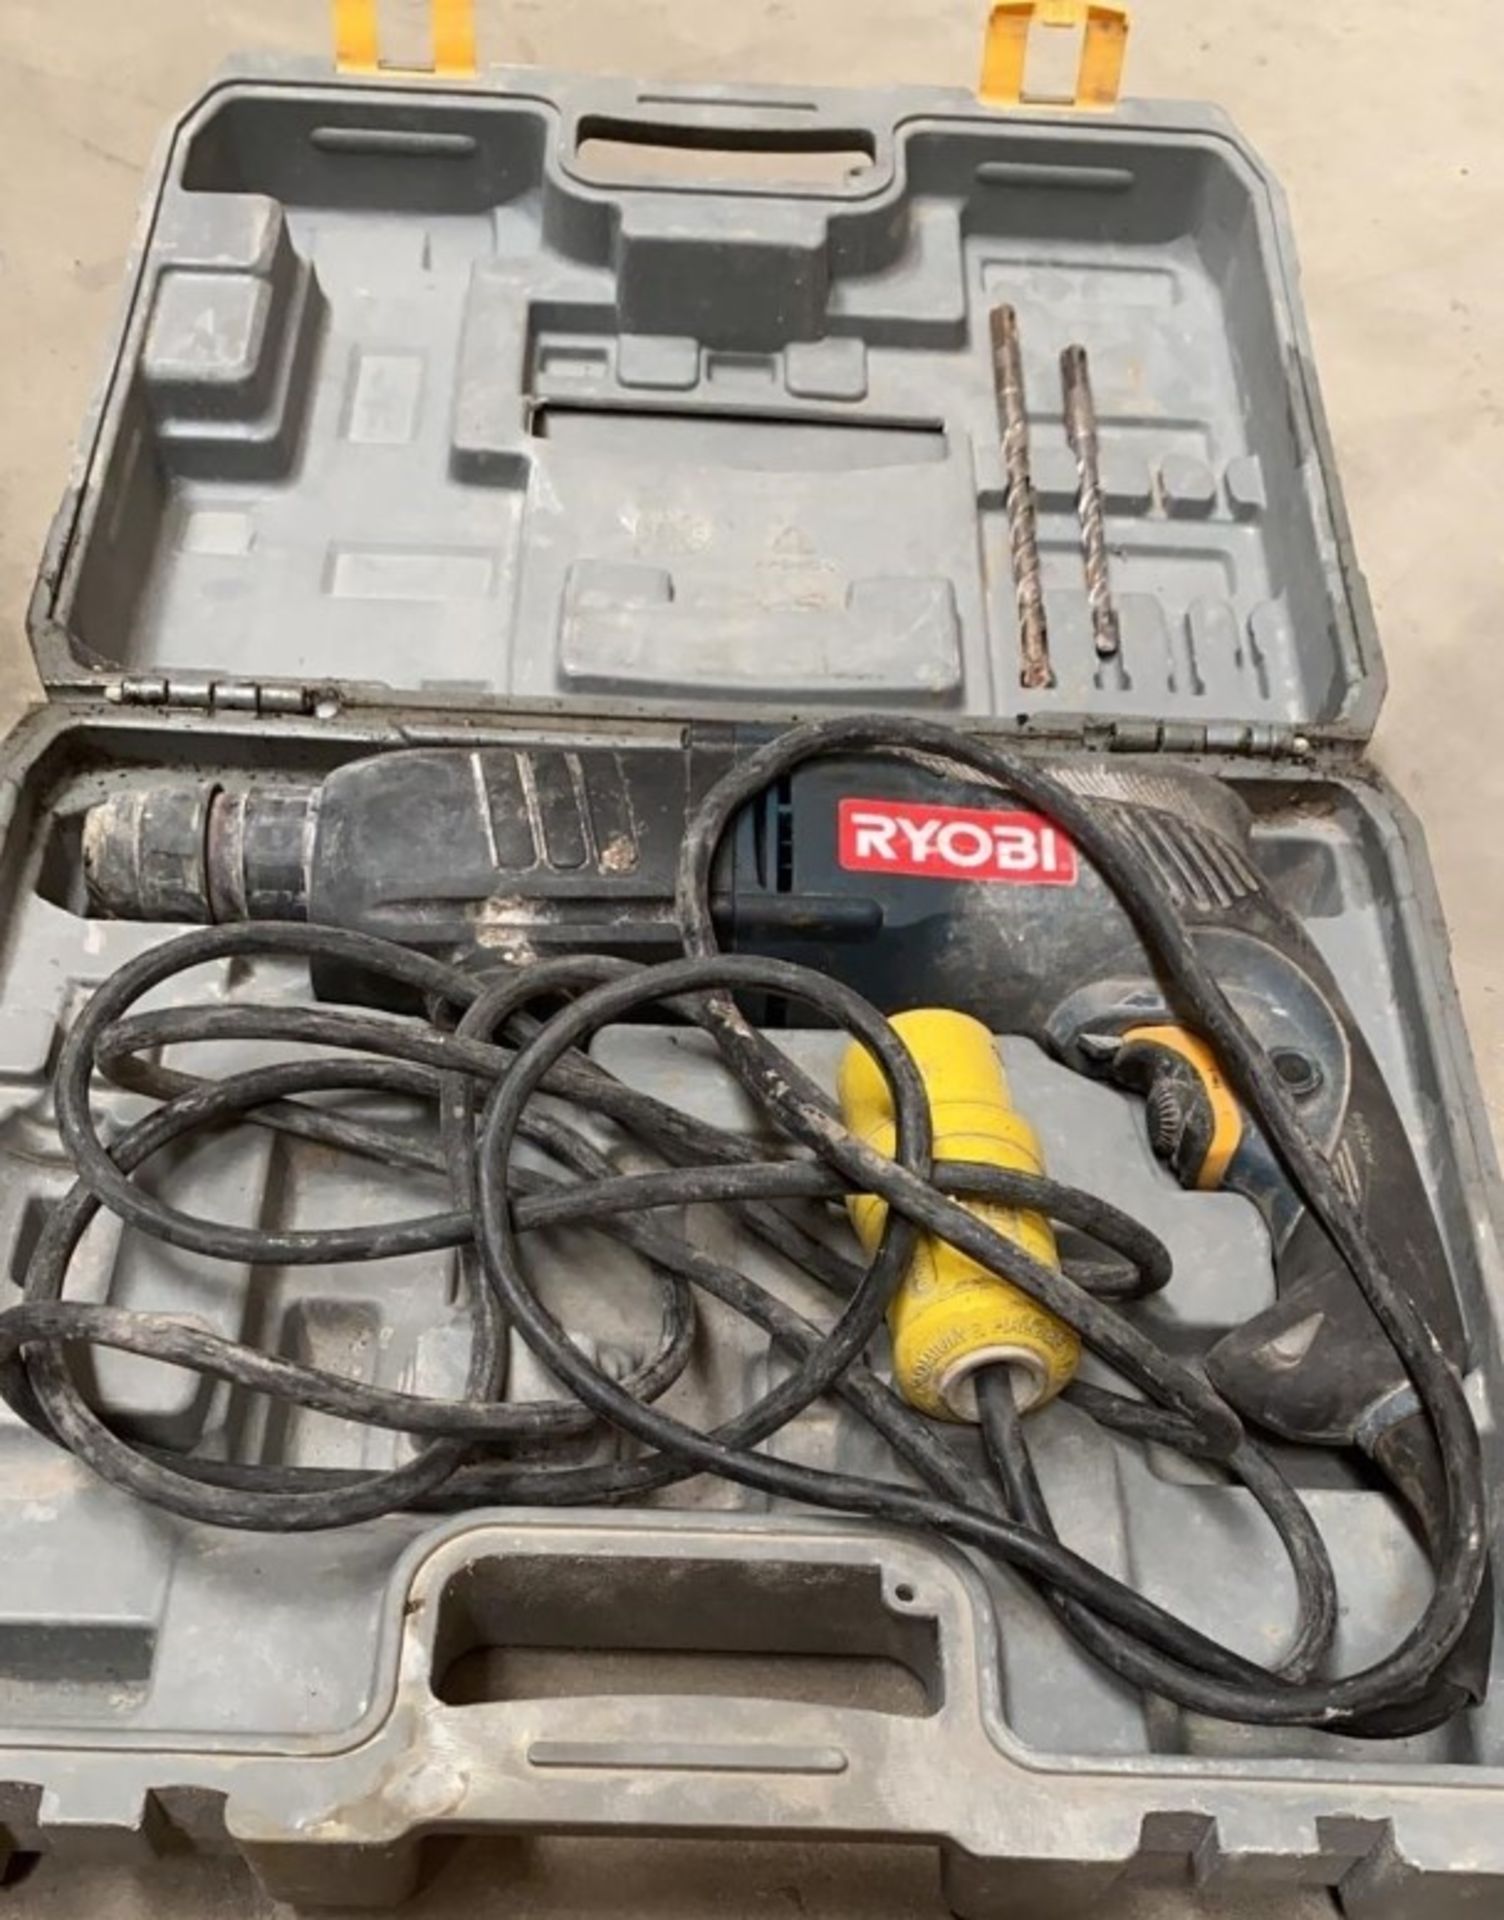 1 x Ryobi 110V Impact Drill - Used, Recently Removed From A Working Site - CL505 - Ref: TL027 -